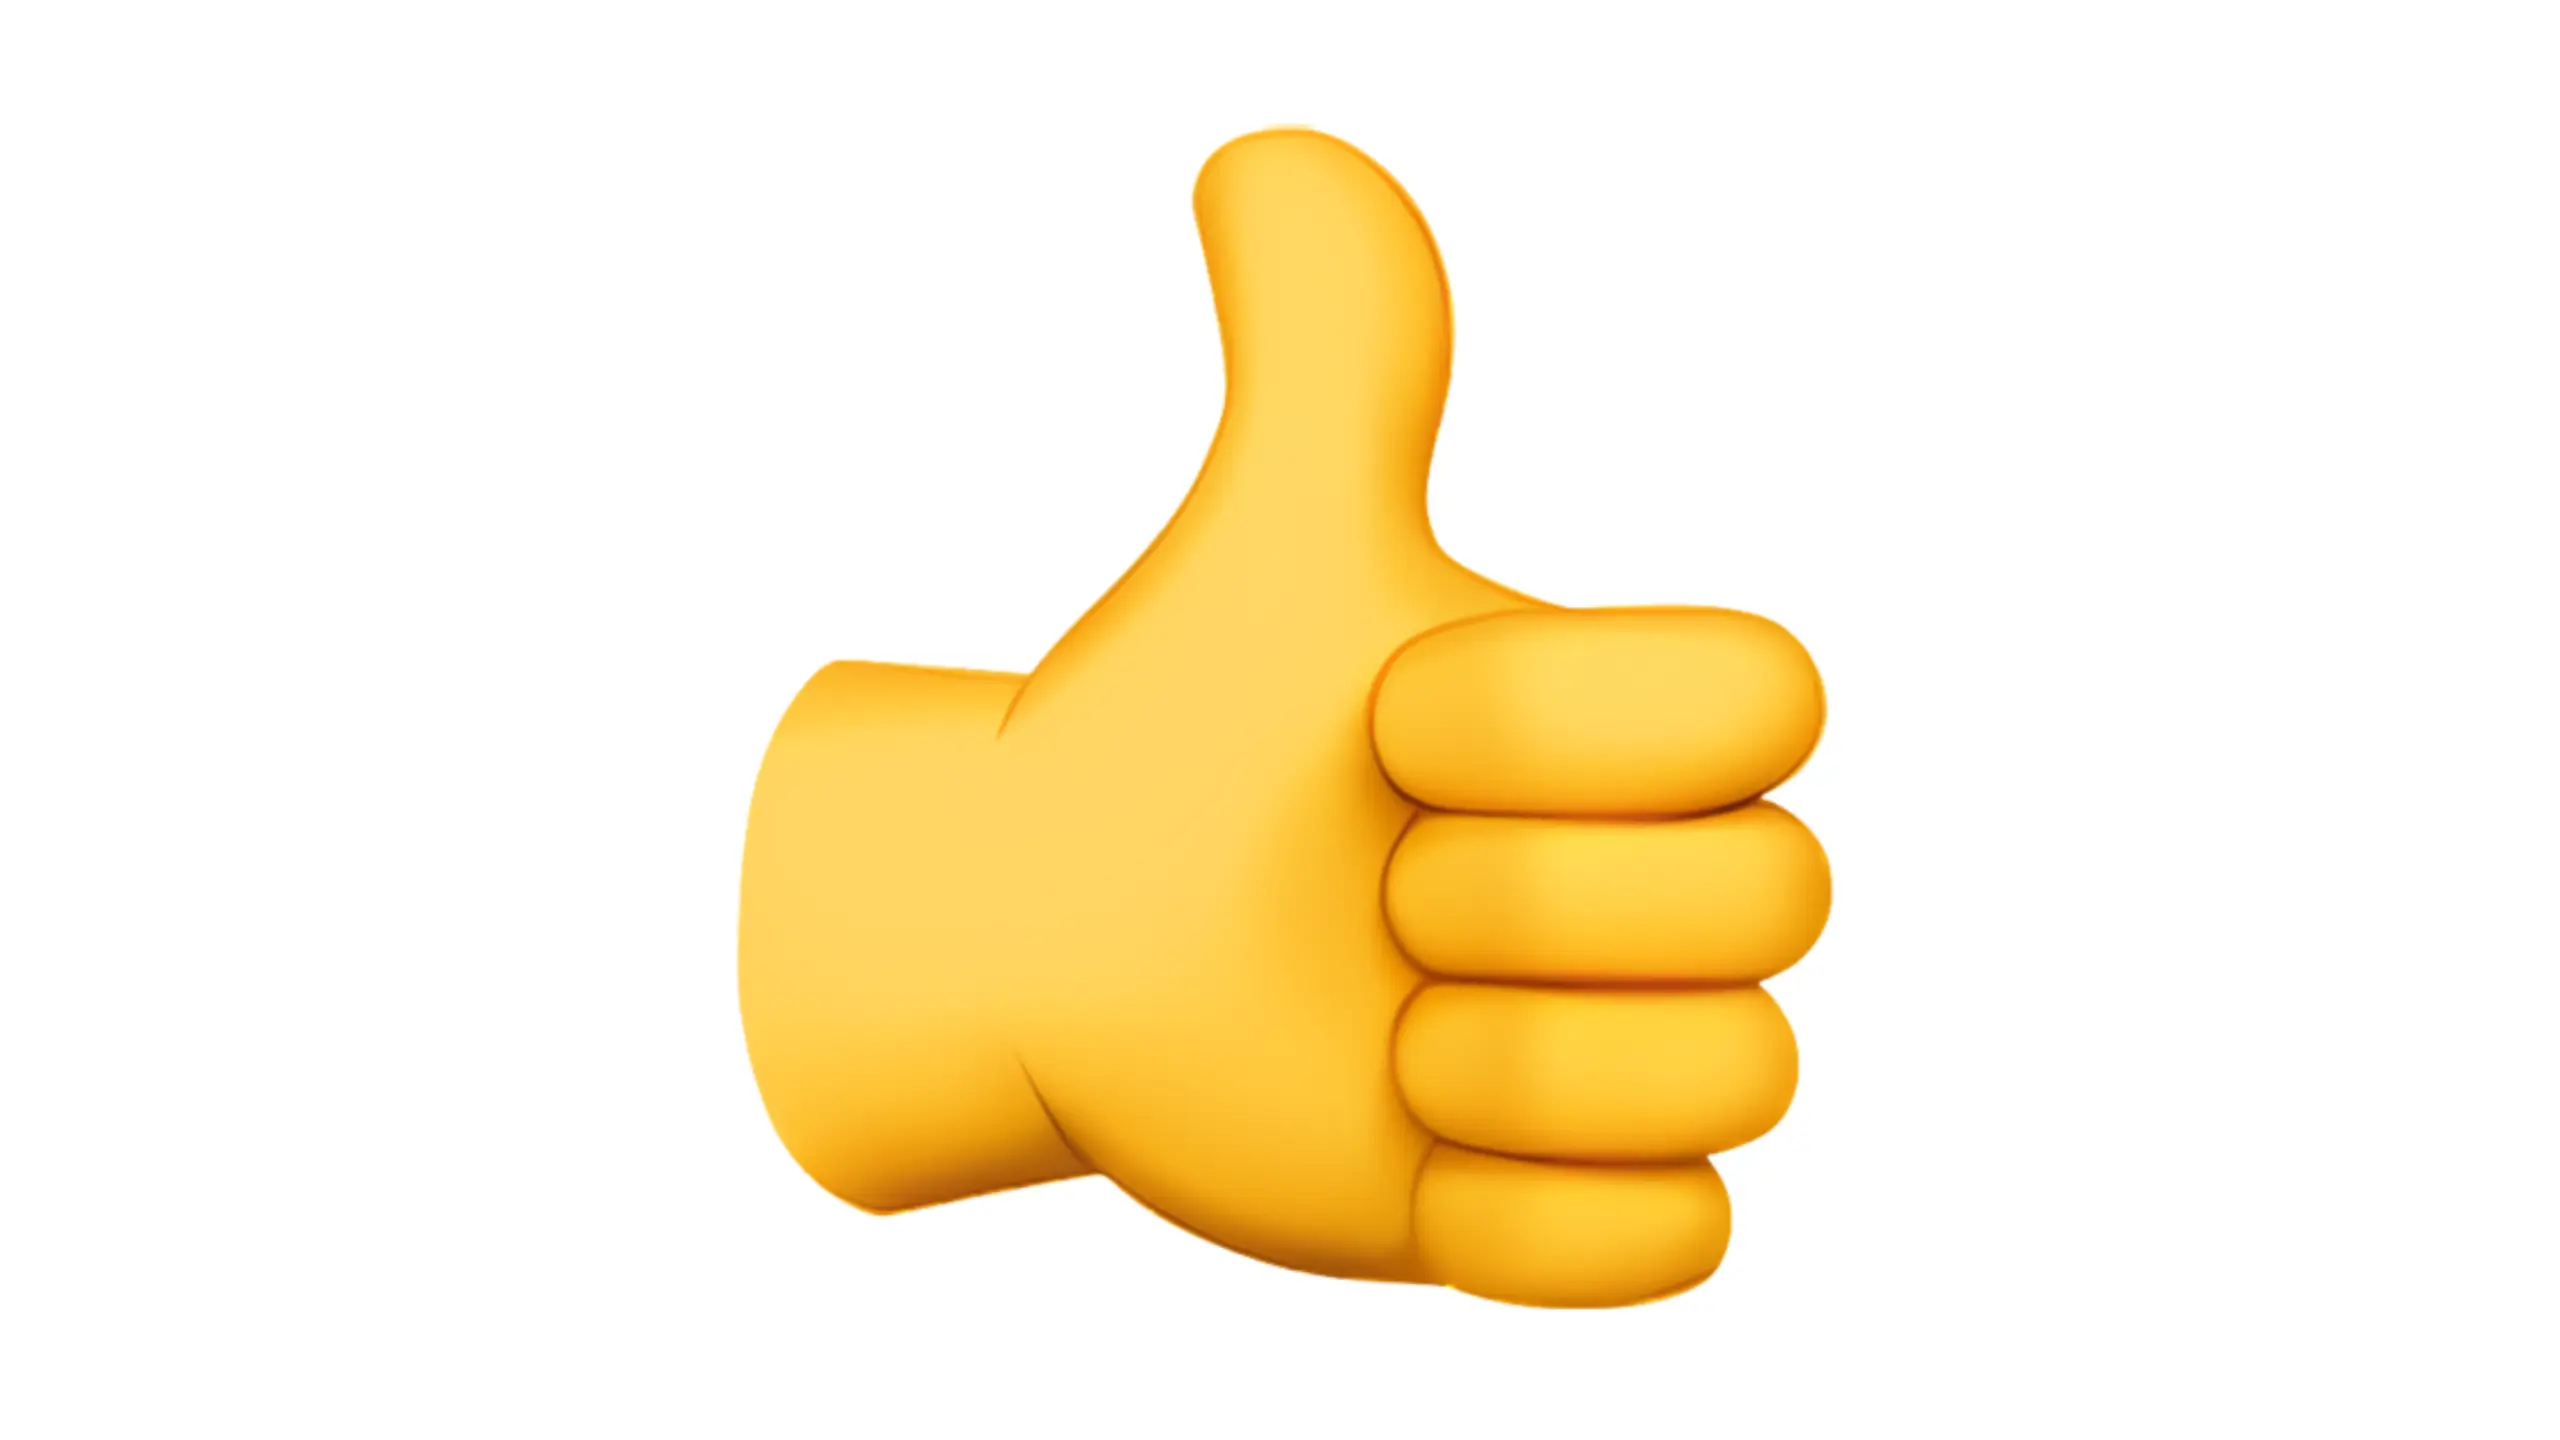 How to Use Thumbs Up Emoji